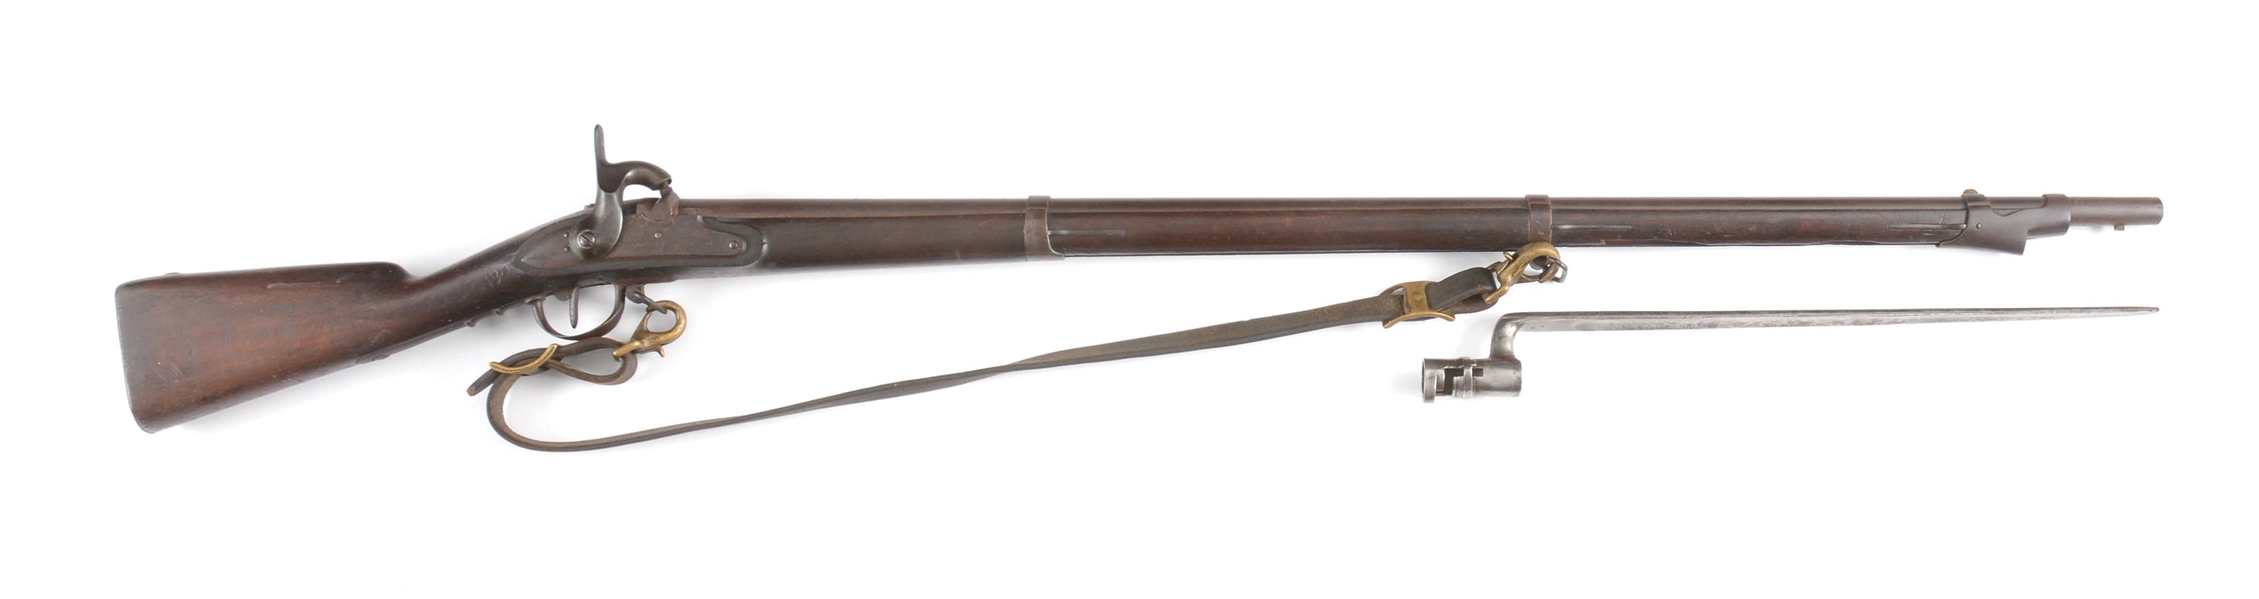 (A) AR 1843 MUSKET WITH SLING AND BAYONET